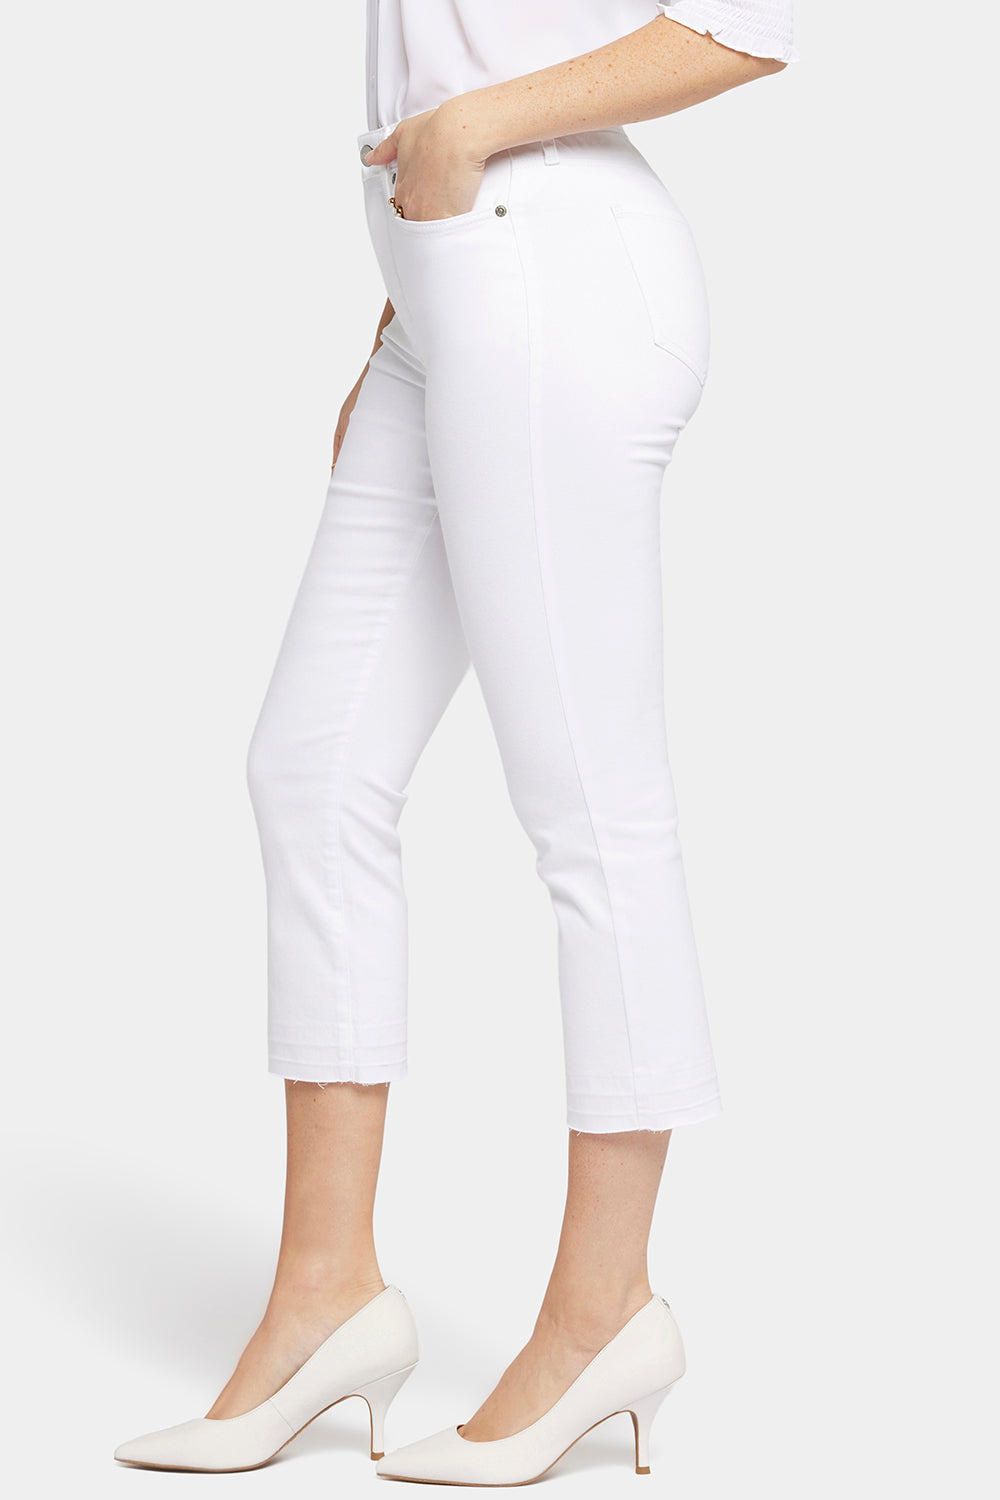 NYDJ Chloe Capri Jeans In Petite With High Rise And Released Hems - Optic White